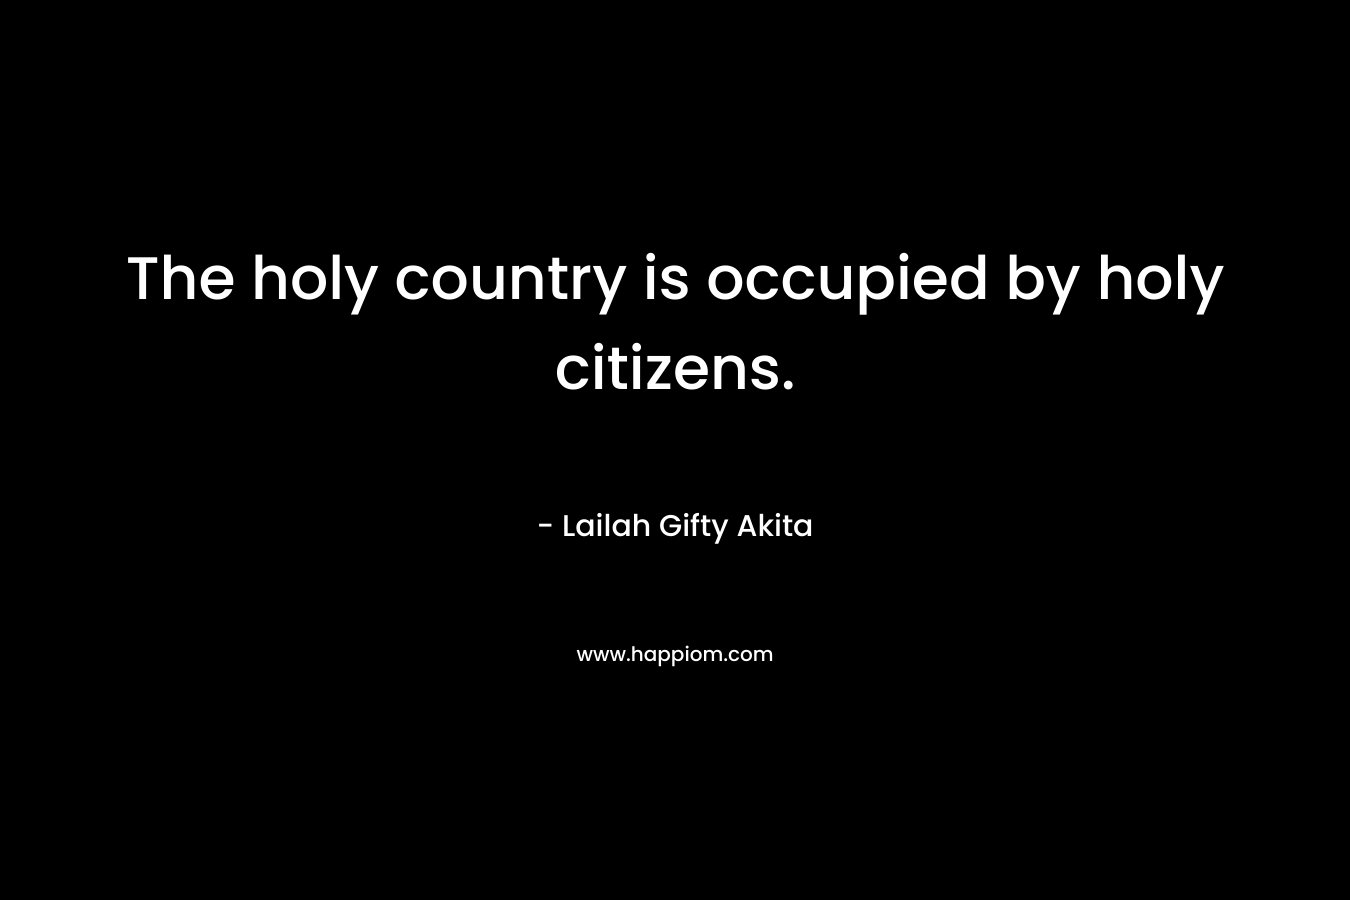 The holy country is occupied by holy citizens.